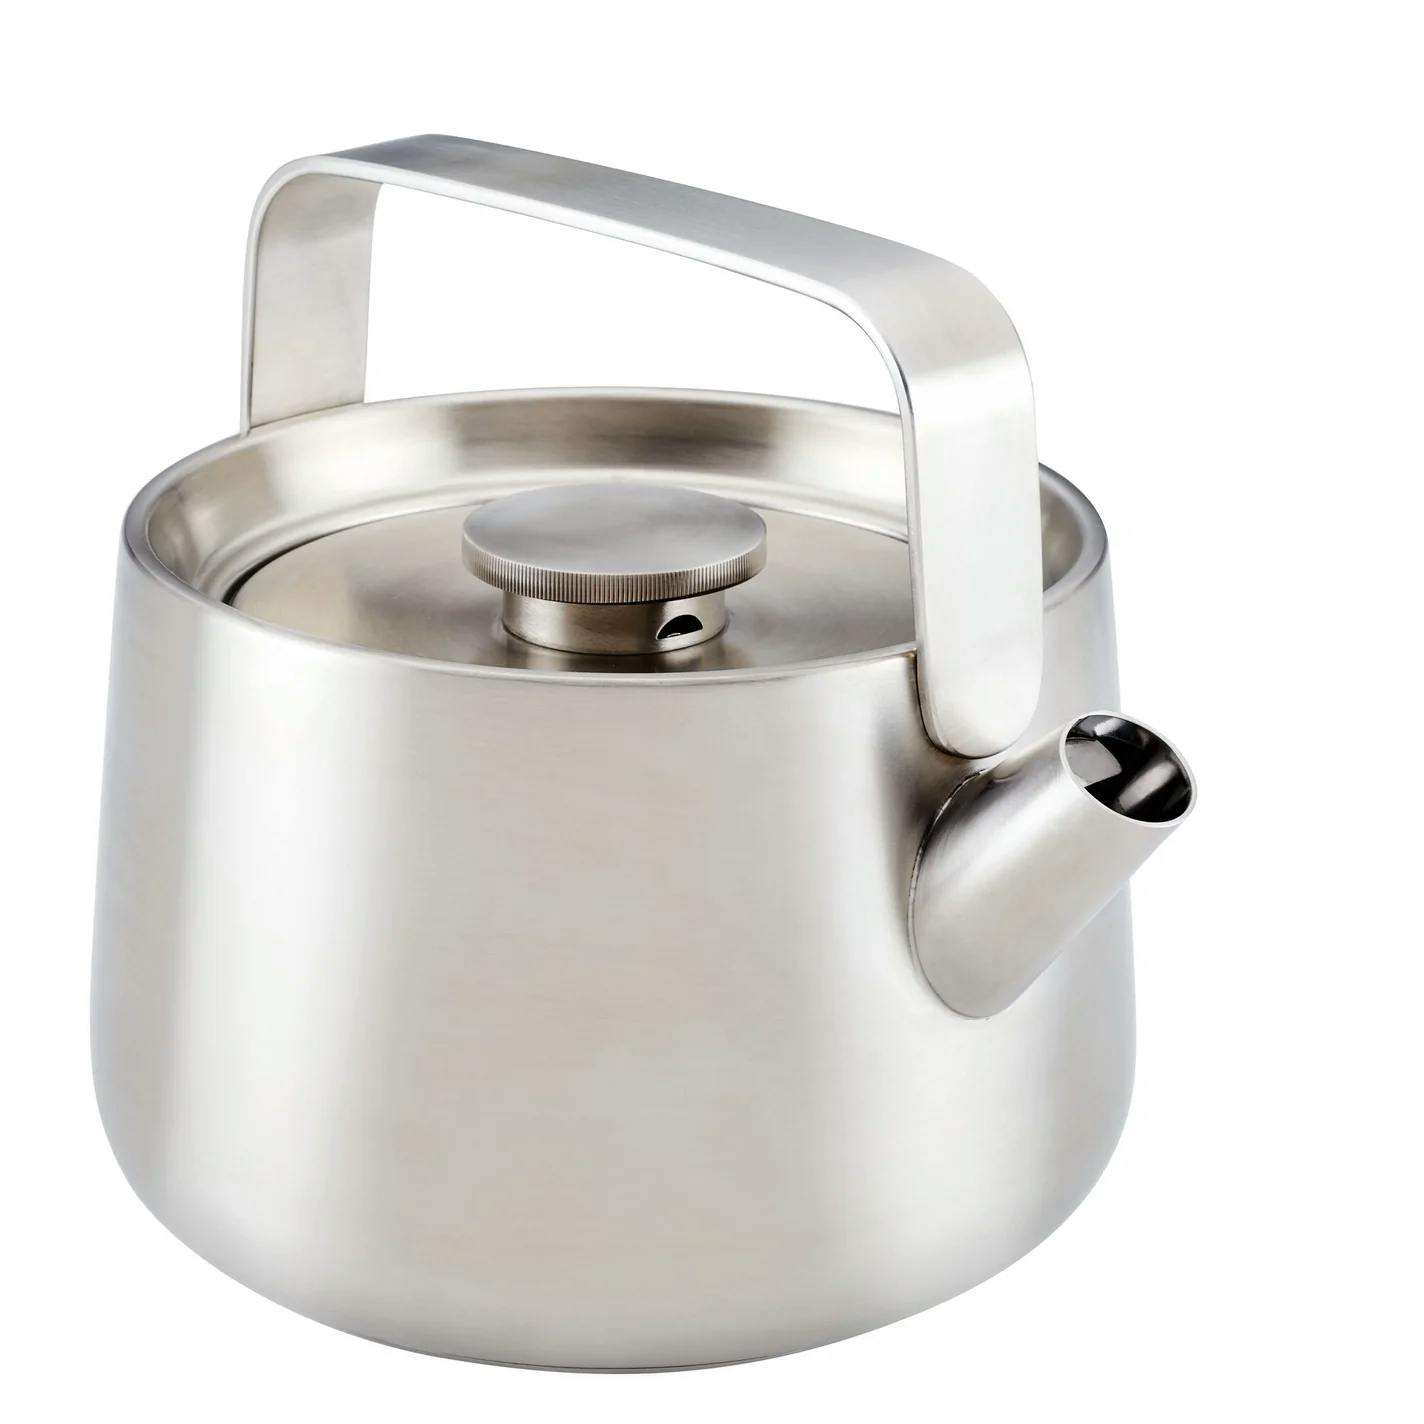 KitchenAid Stainless Steel Whistling Induction Teakettle, 1.9-Quart,  Brushed Stainless Steel